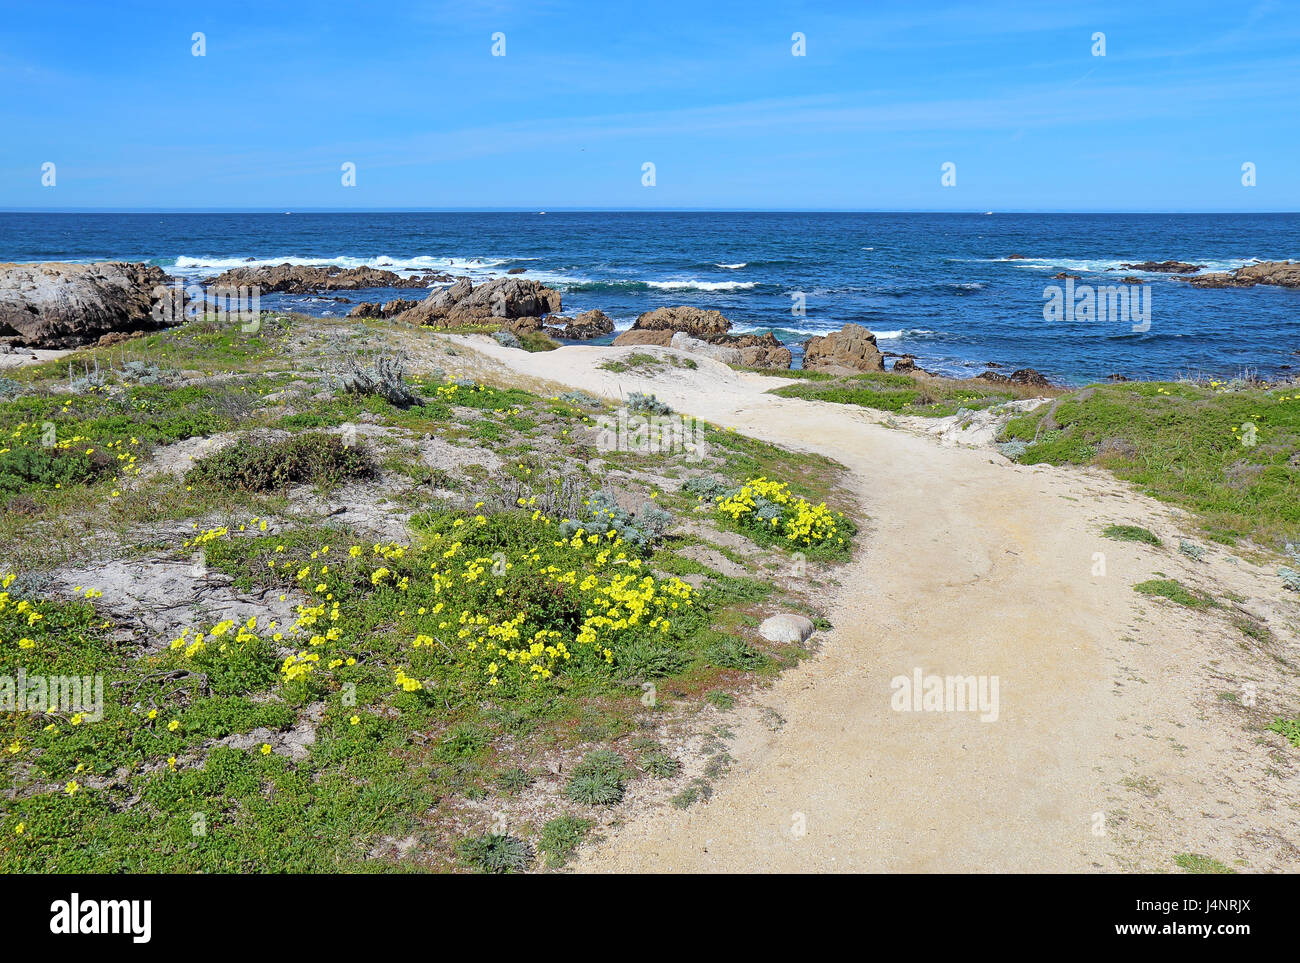 Walkway along the bluff with surf, rocks and early spring wildflowers at Asilomar State Beach park on the Monterey Peninsula Stock Photo